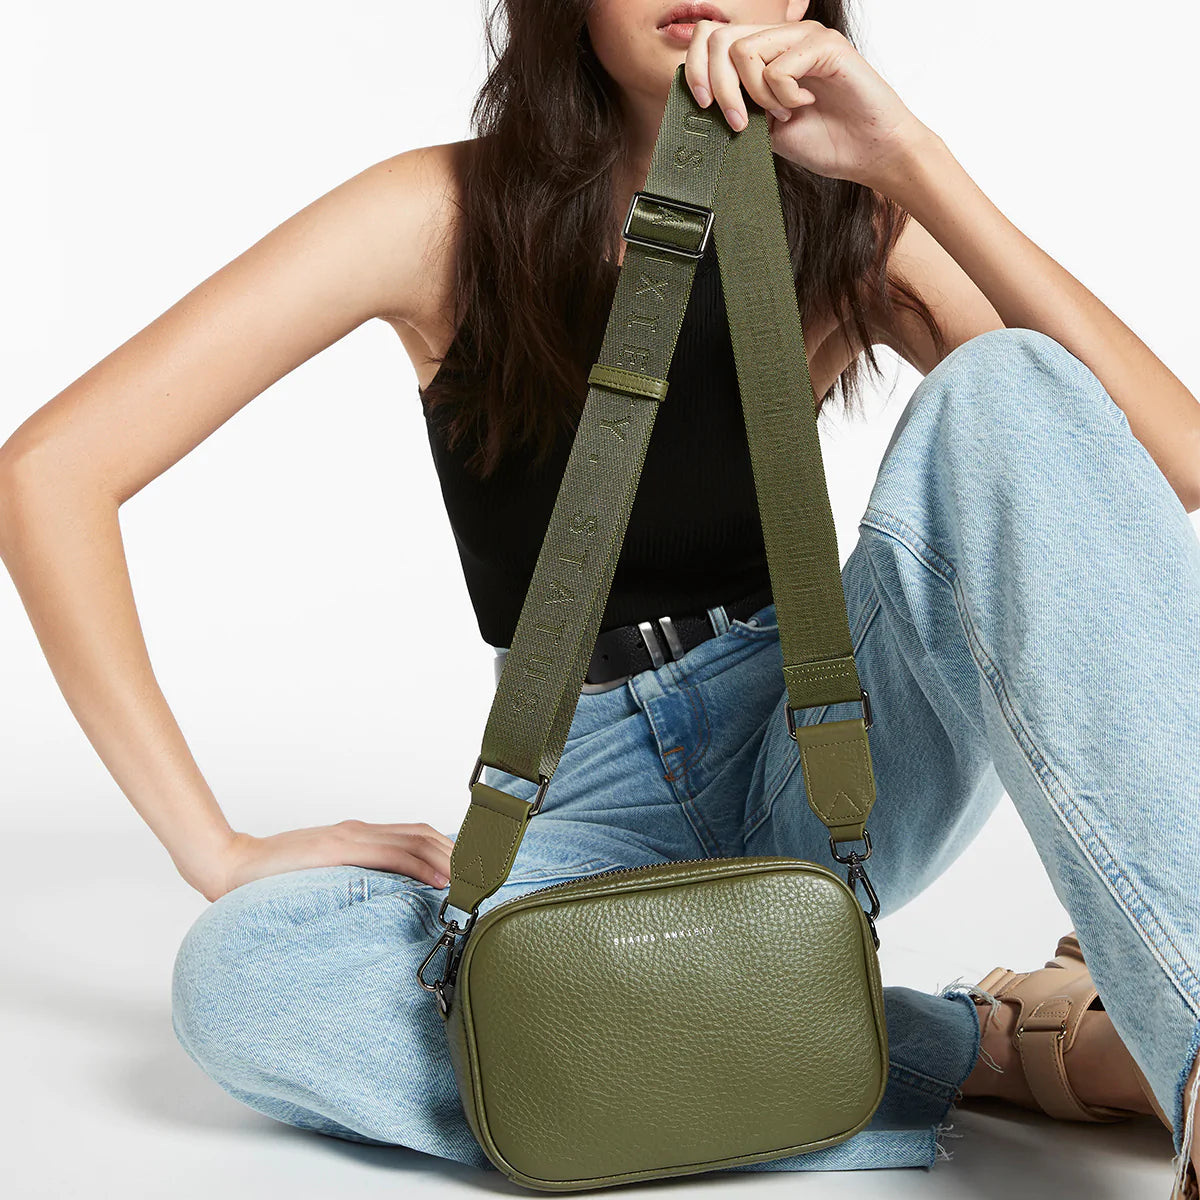 Status Anxiety Without You Bag Strap in Khaki